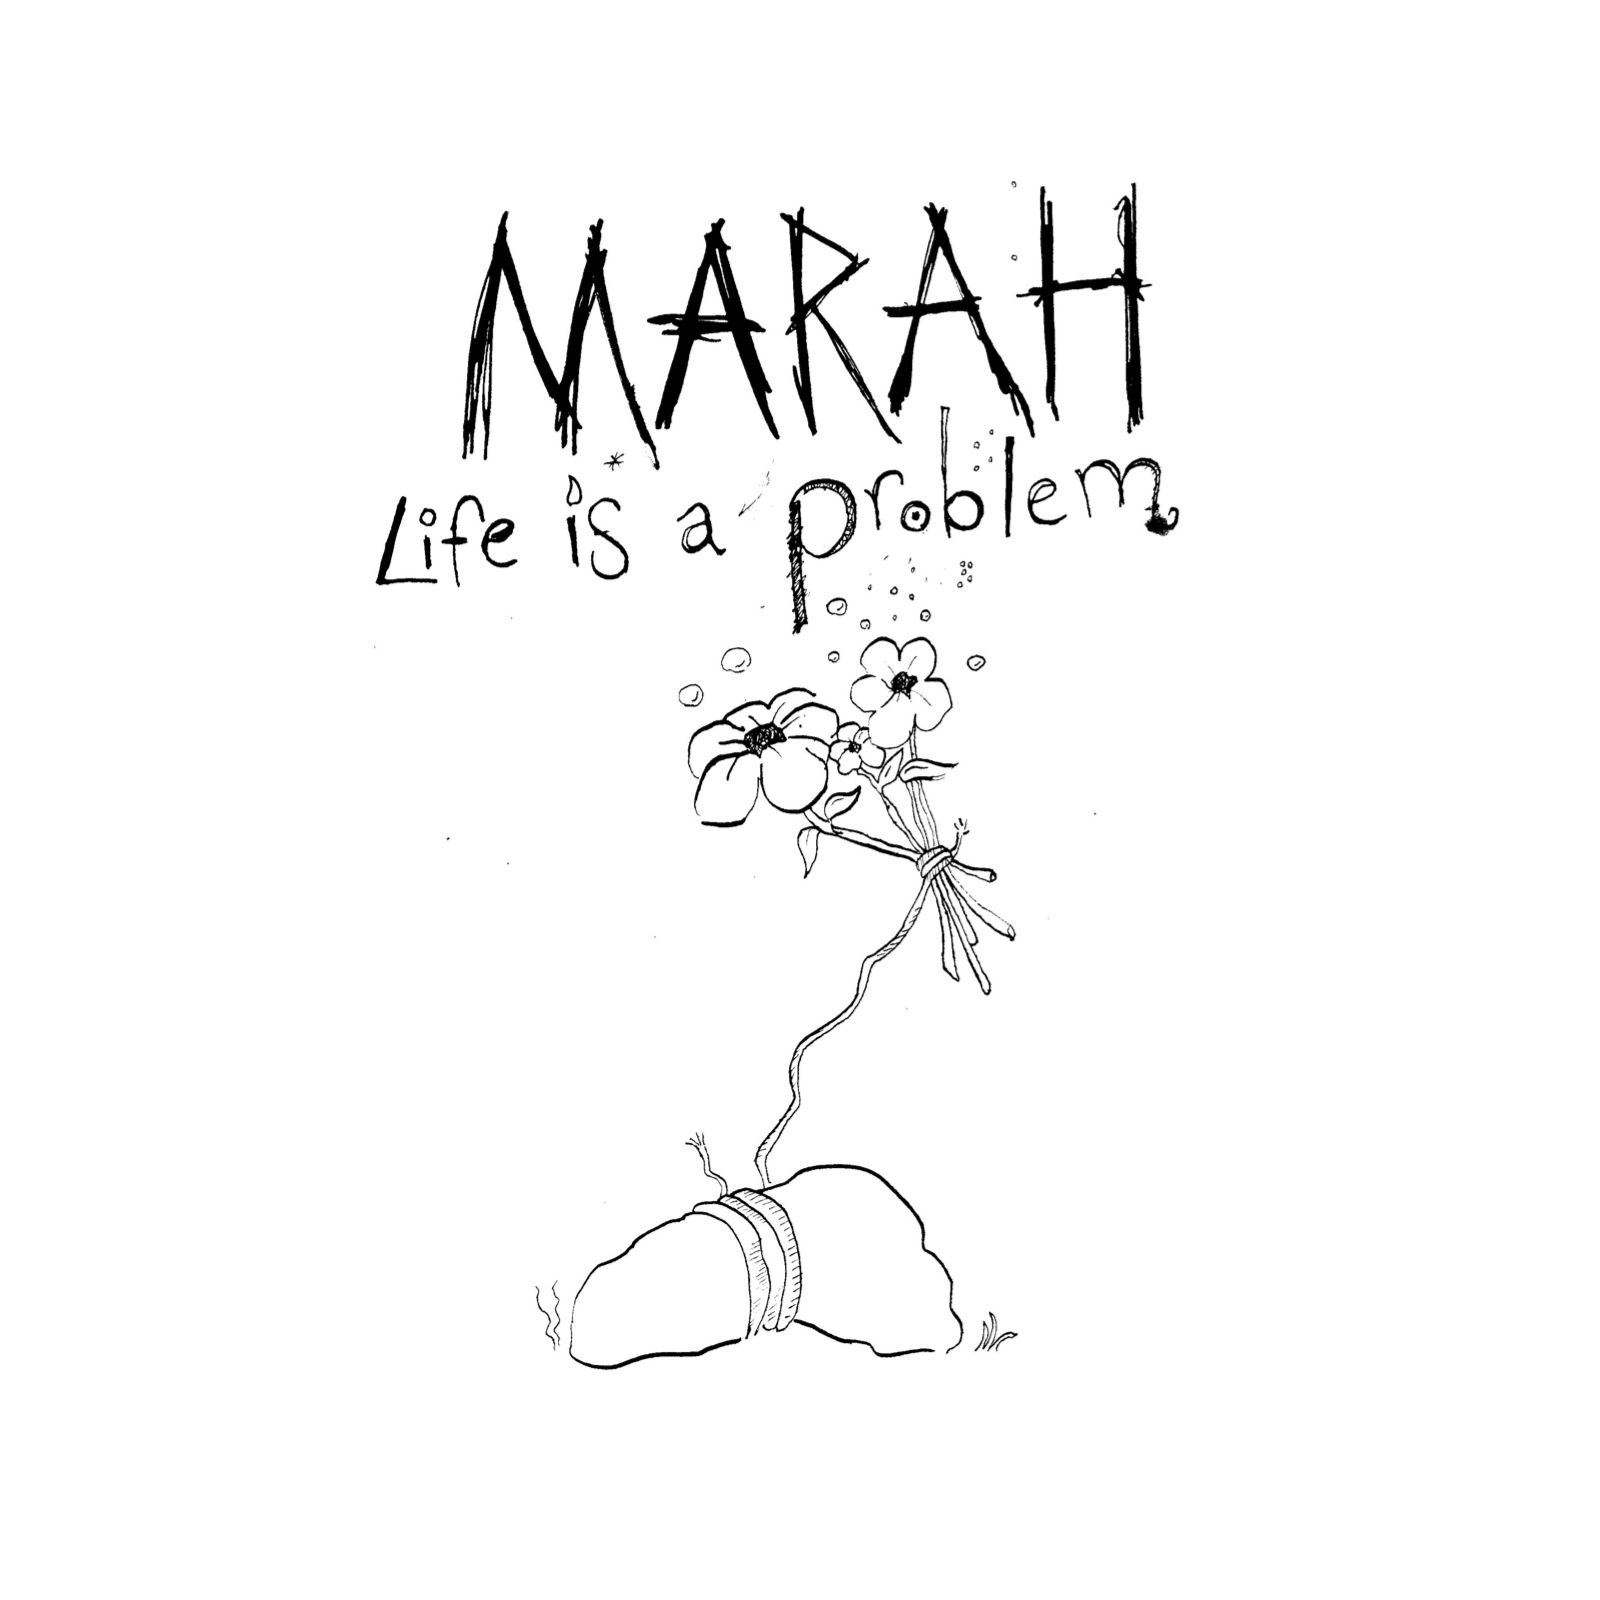 life_is_a_problem_cover_20100420_112953.jpg